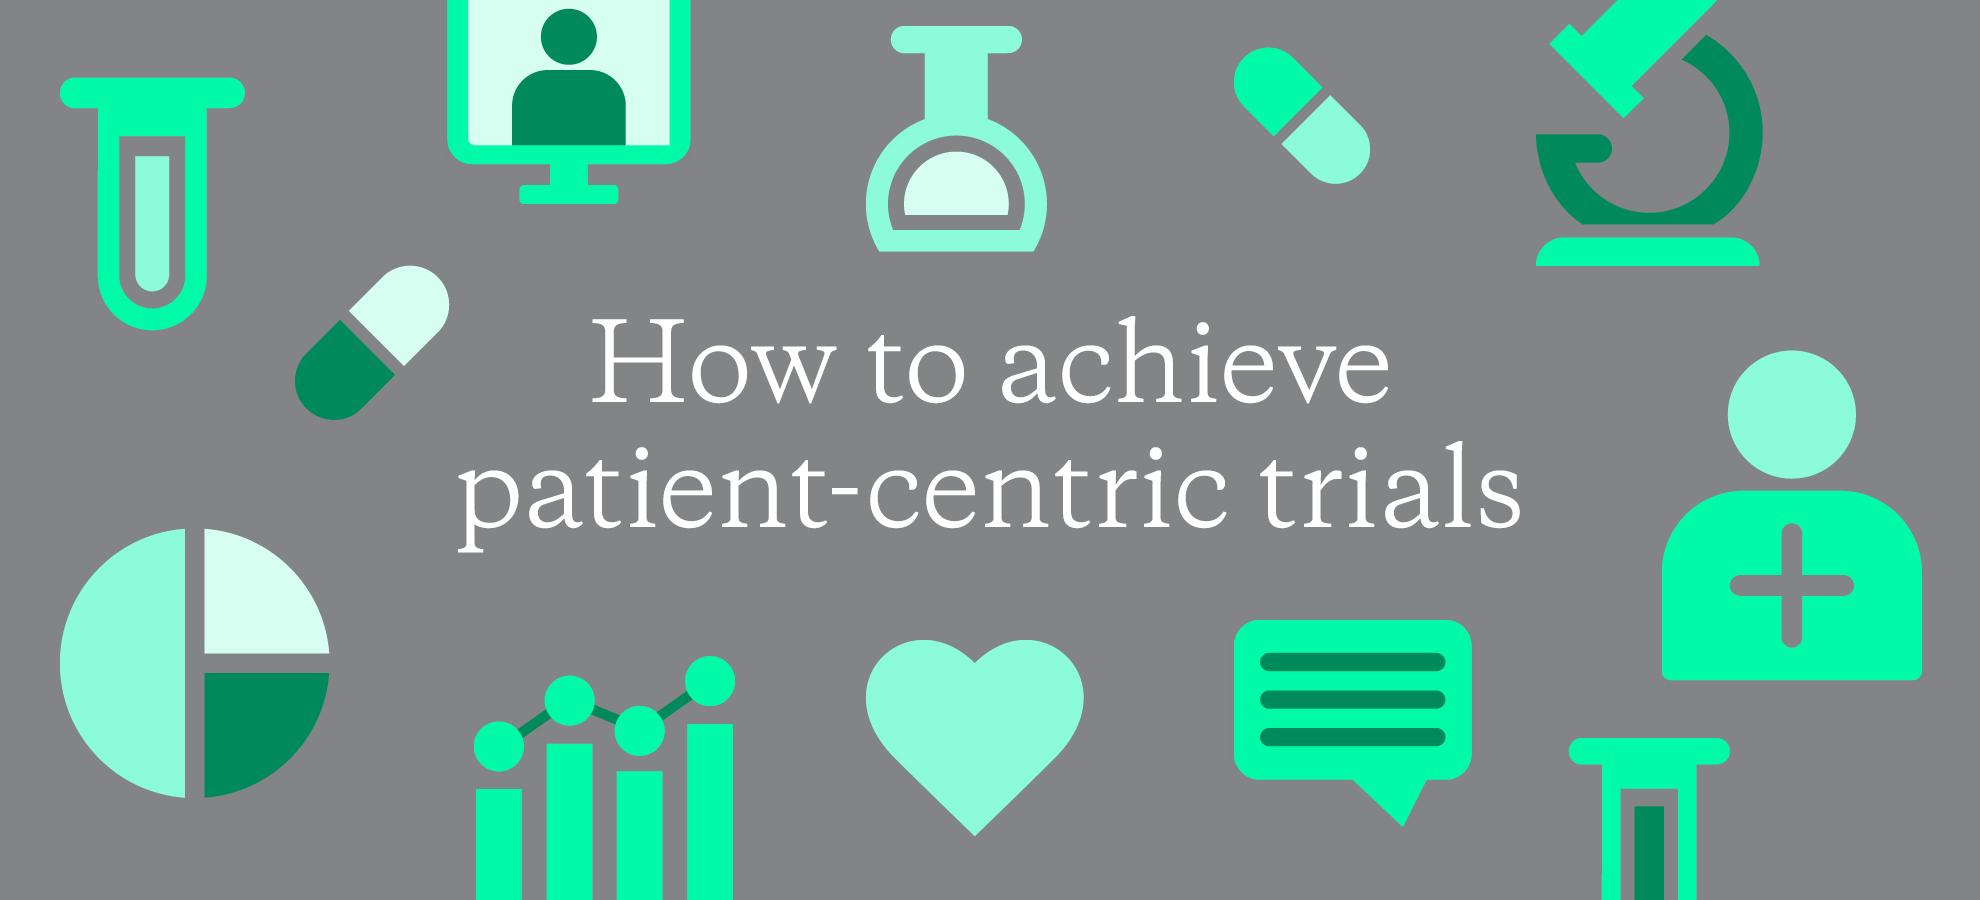 How to achieve patient-centric trials